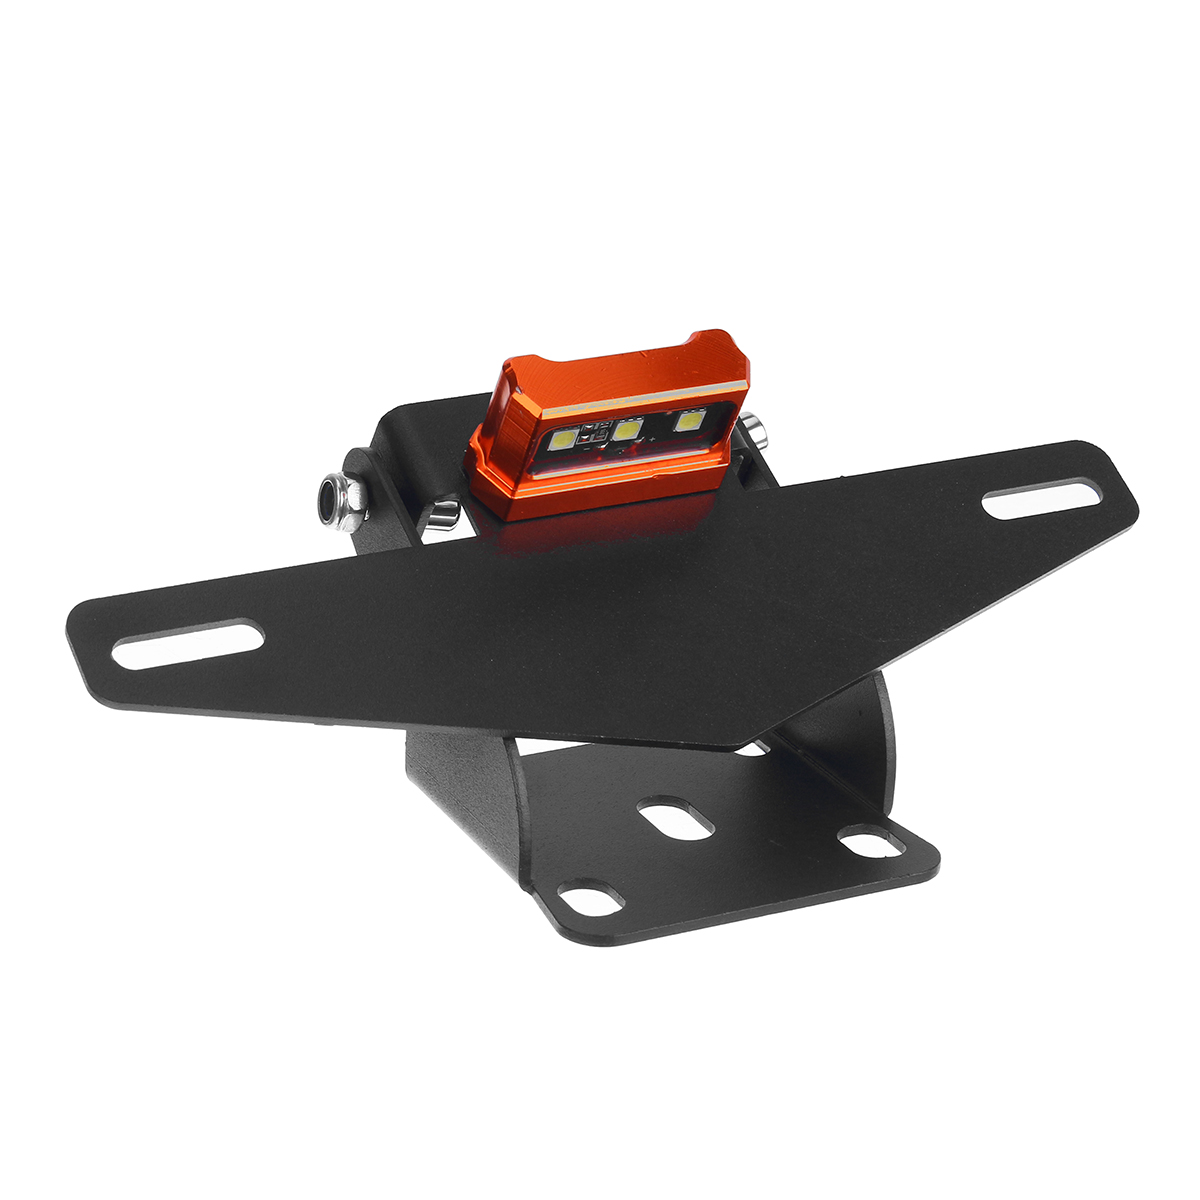 Motorcycle Rear License Plate Tail Frame Holder Bracket with LED Light for 125 250 390 200 2013-2019